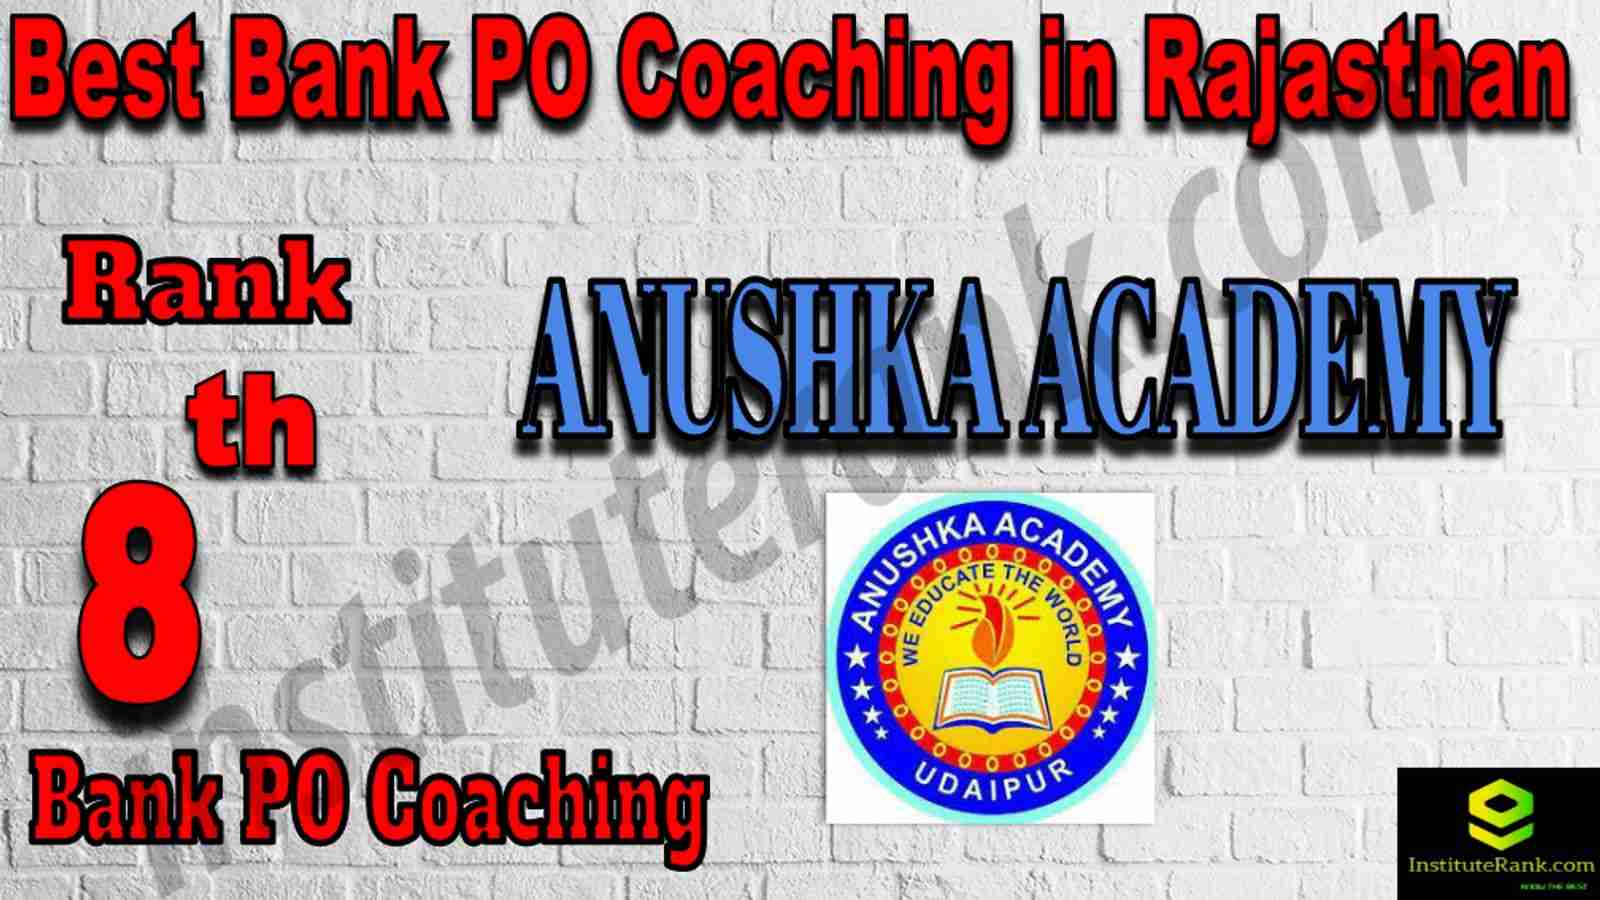 8th Best Bank PO Coaching in Rajasthan